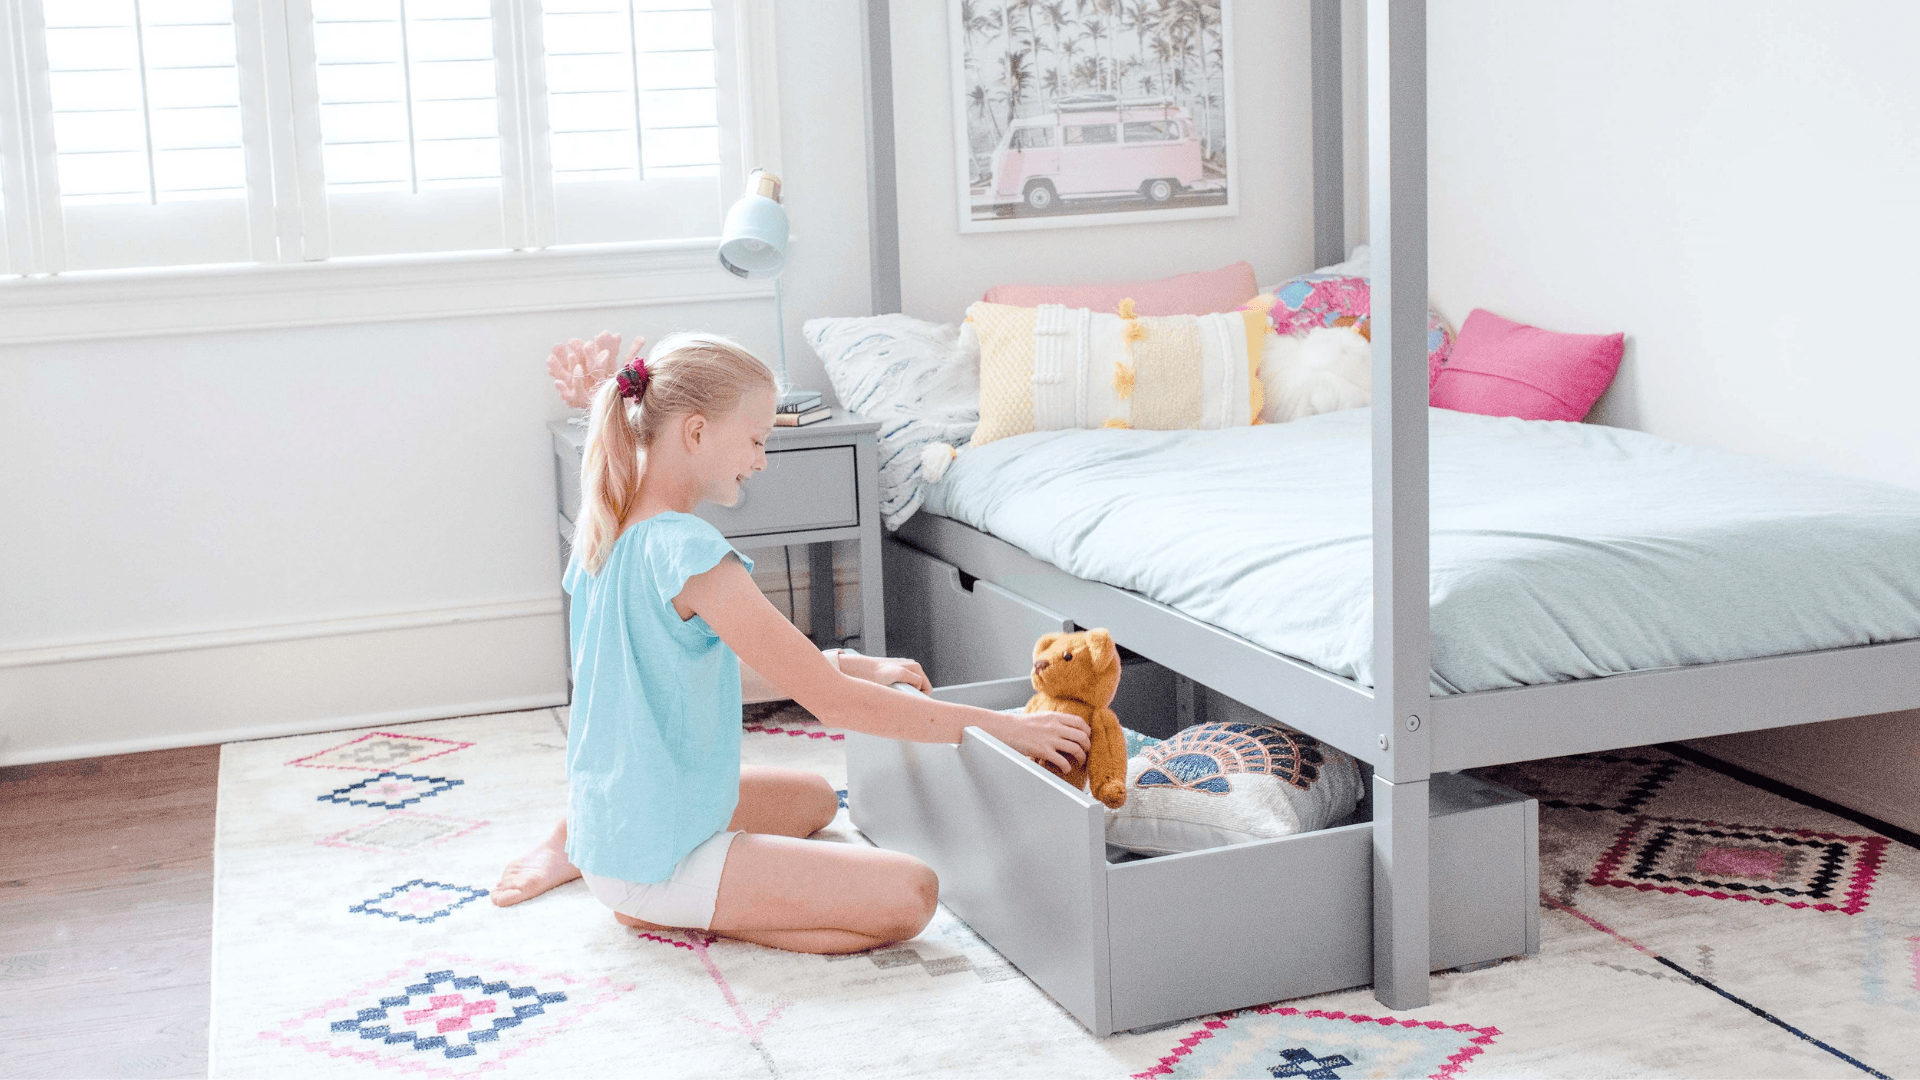 The (Not So) Secret Guide to the Best Storage Beds – Max and Lily